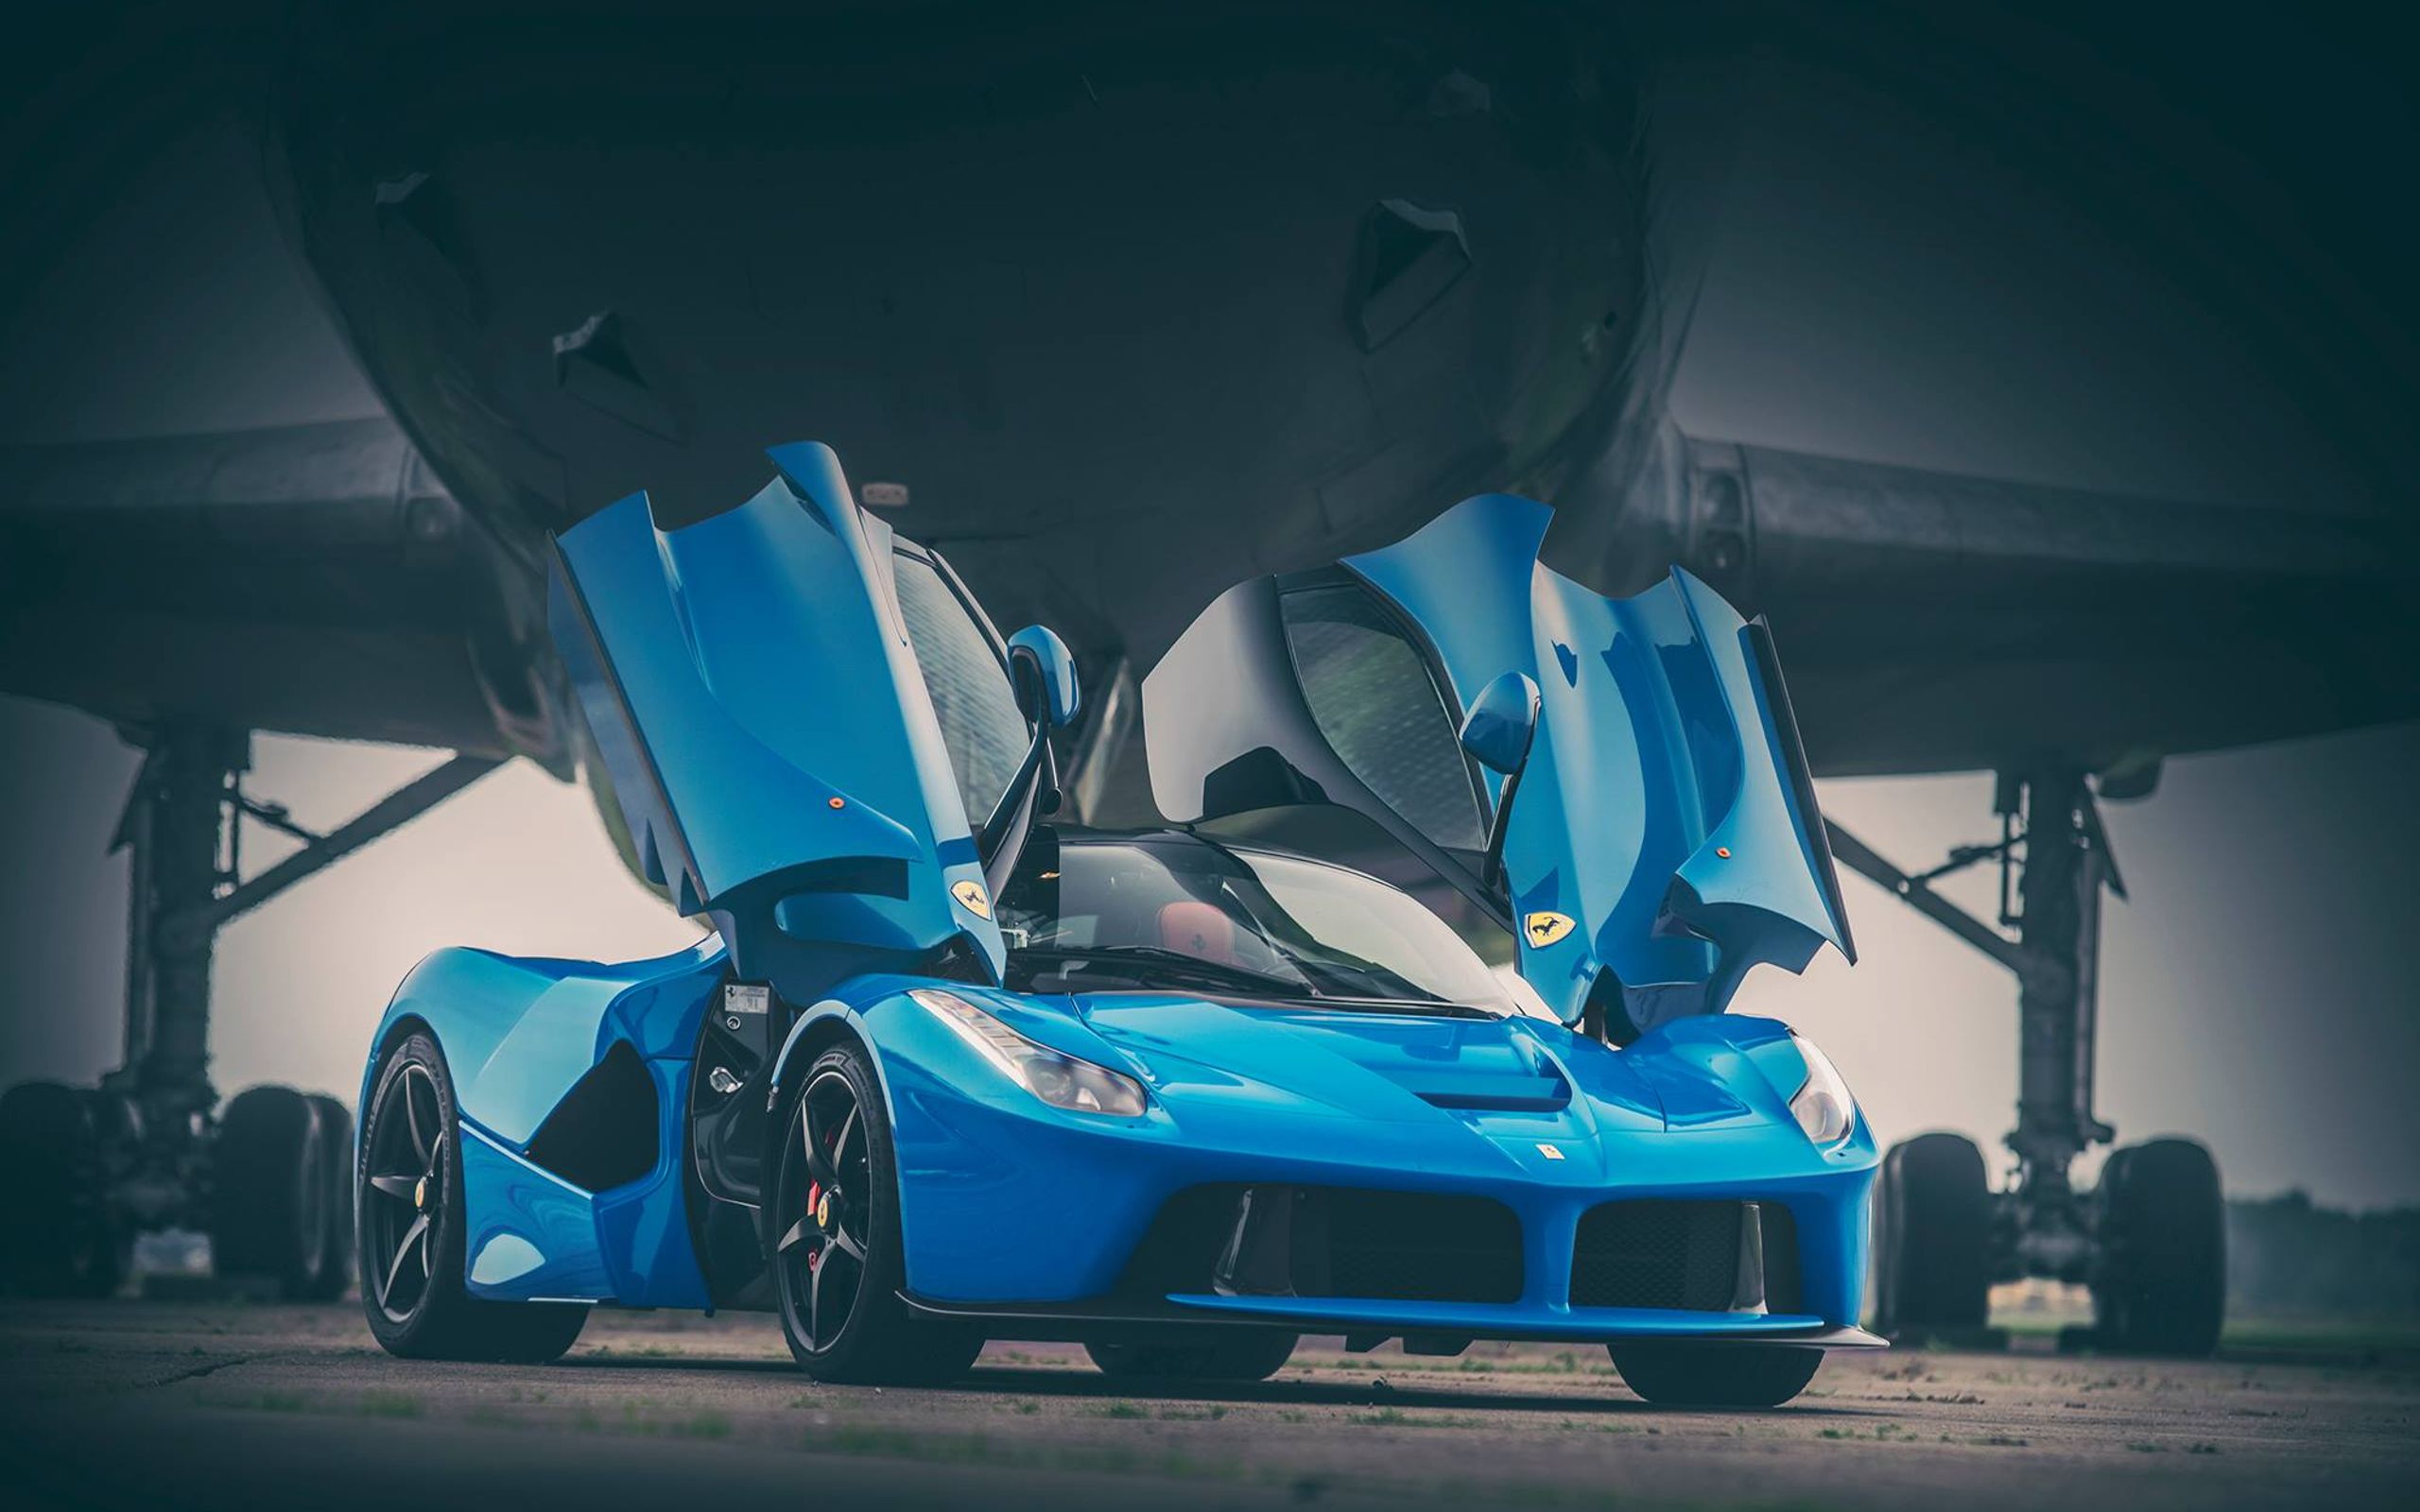 These LaFerrari Wallpaper Show Off The Prancing Horse Looking